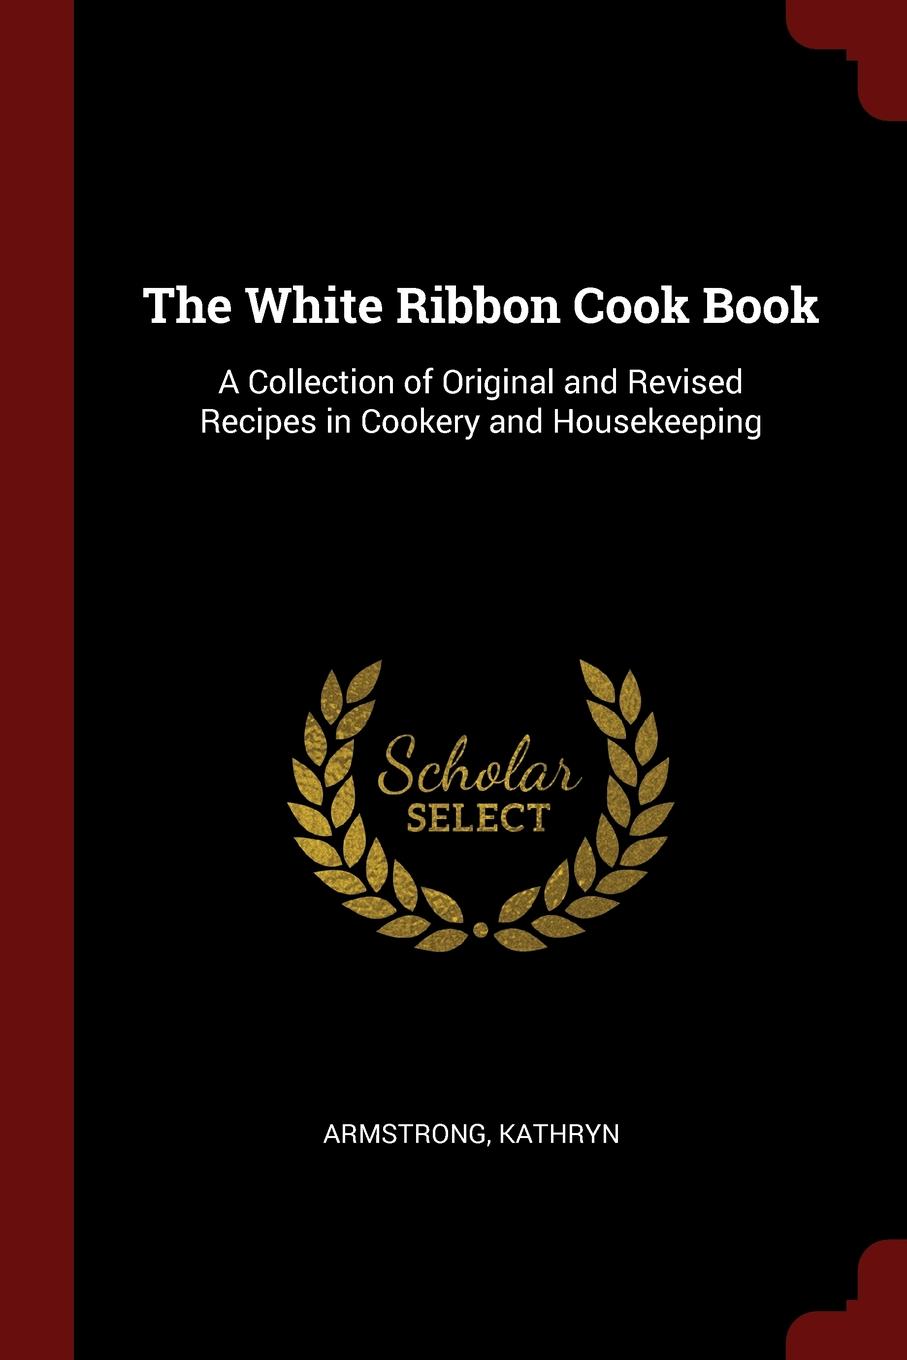 The White Ribbon Cook Book. A Collection of Original and Revised Recipes in Cookery and Housekeeping